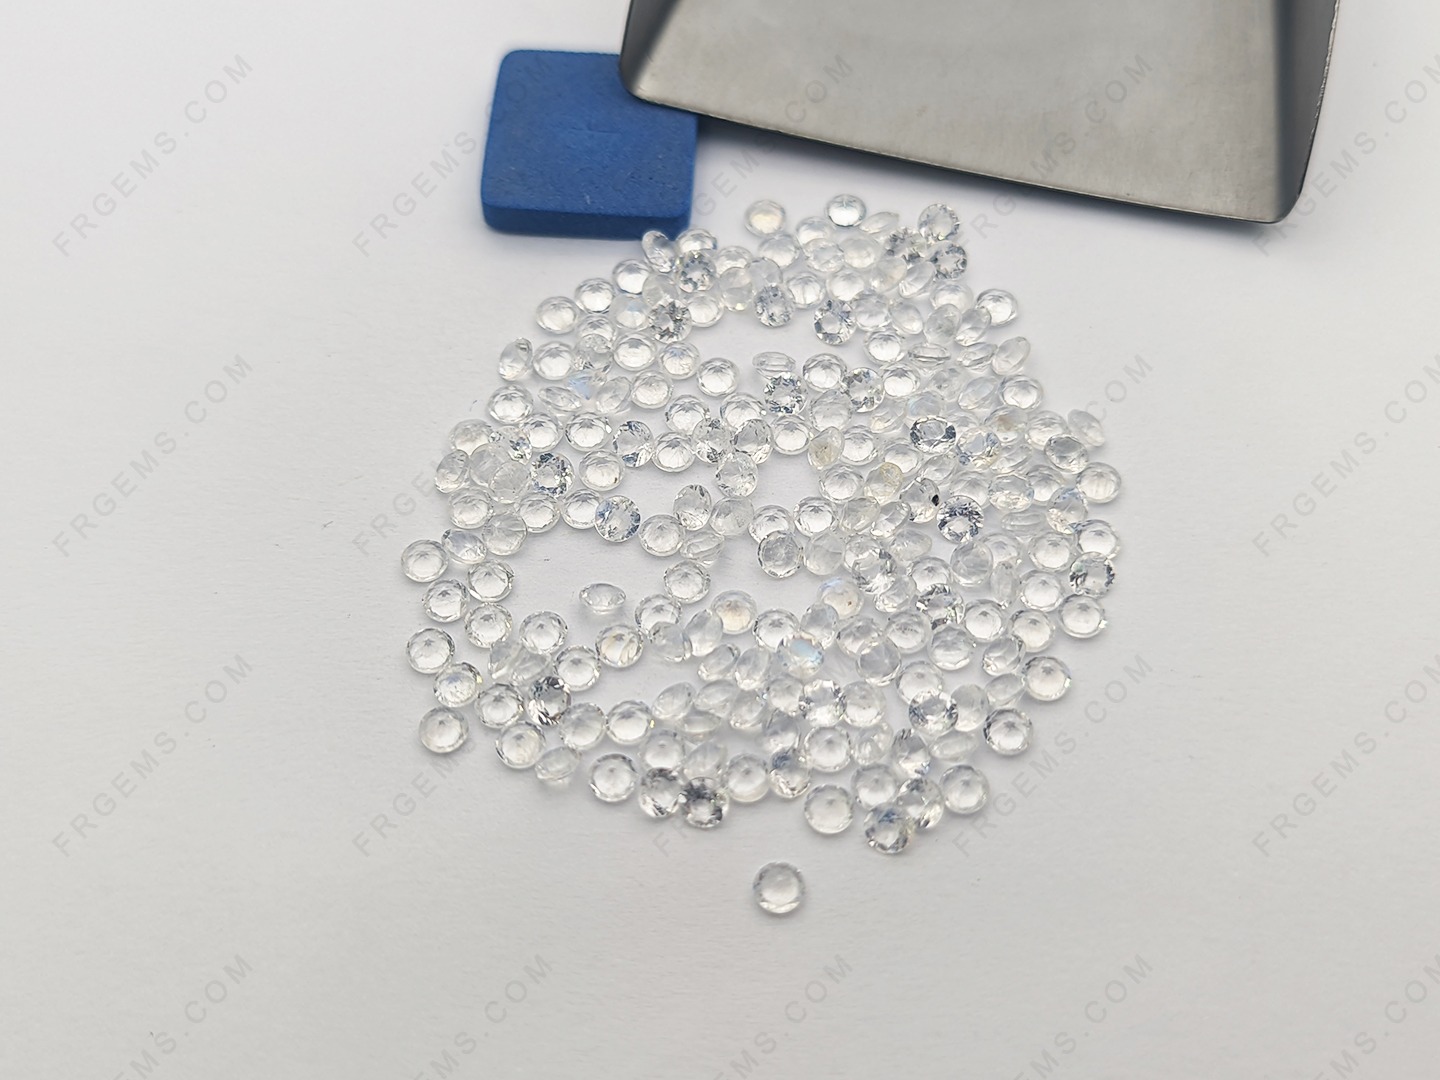 Wholesale Loose Natural Rainbow Moonstone Color Melee small Round shape faceted cut gemstones